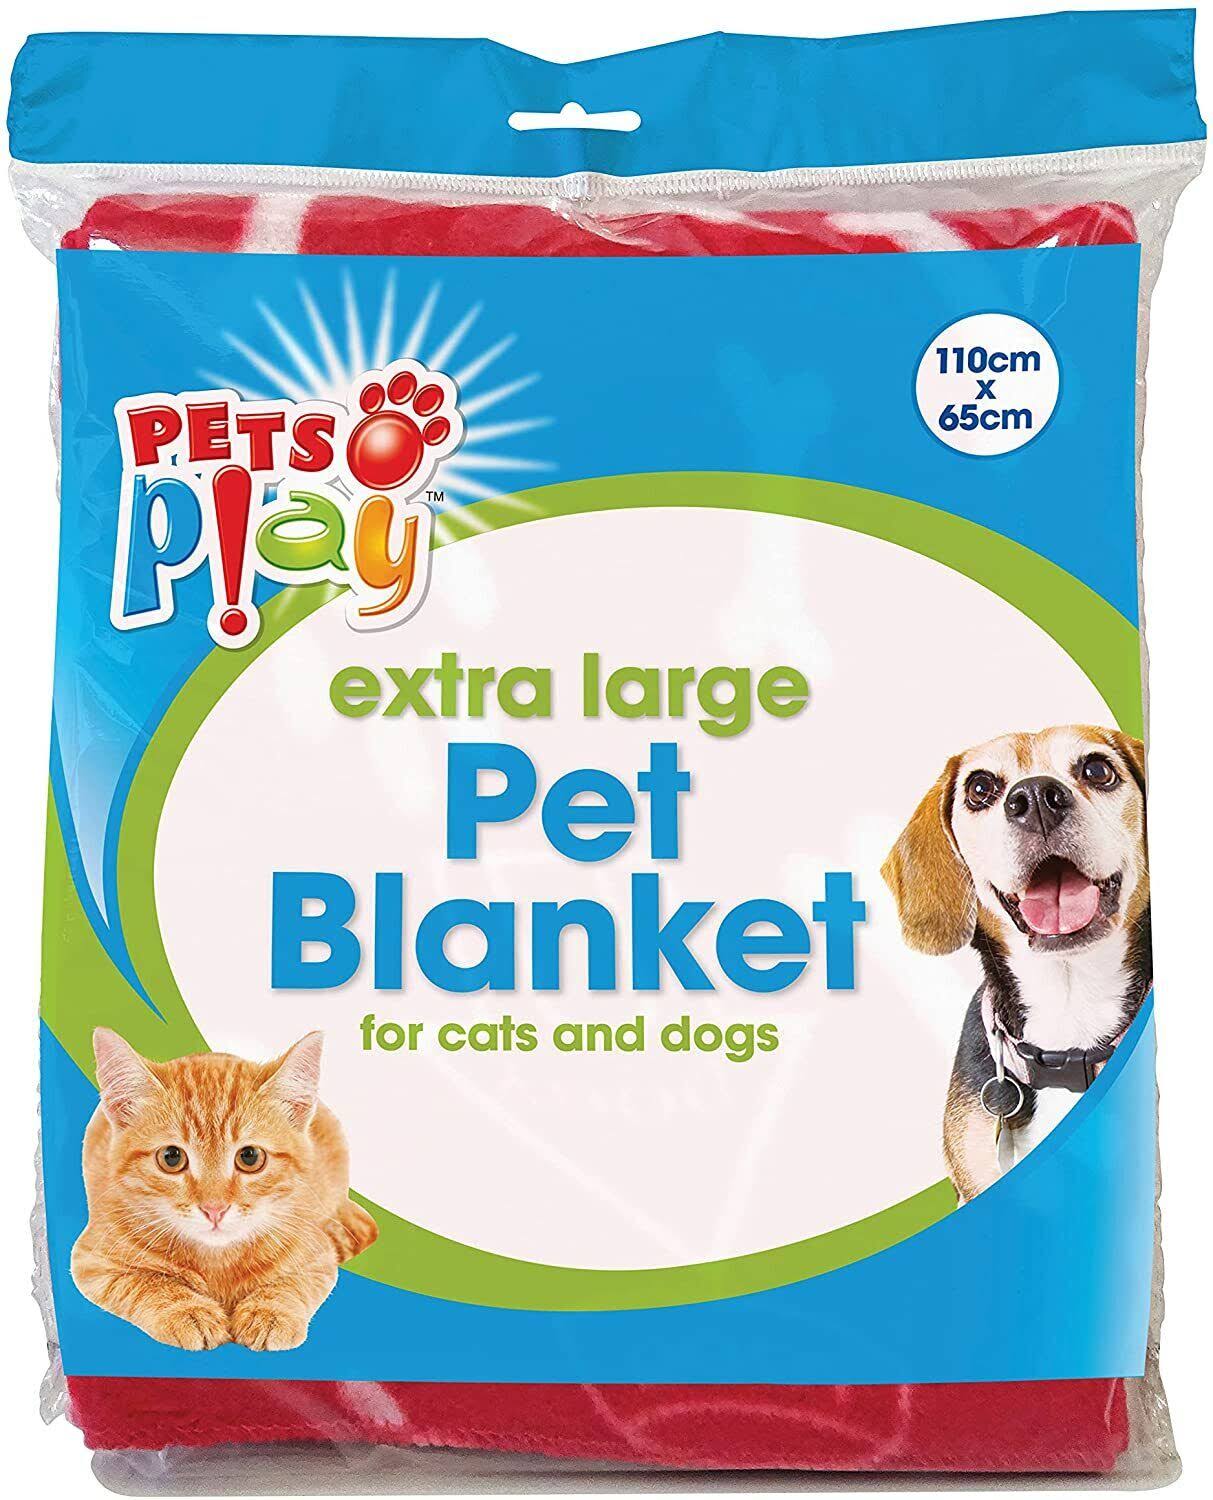 Pets Play Pet Blanket for Cats Dogs 110 x 65cm